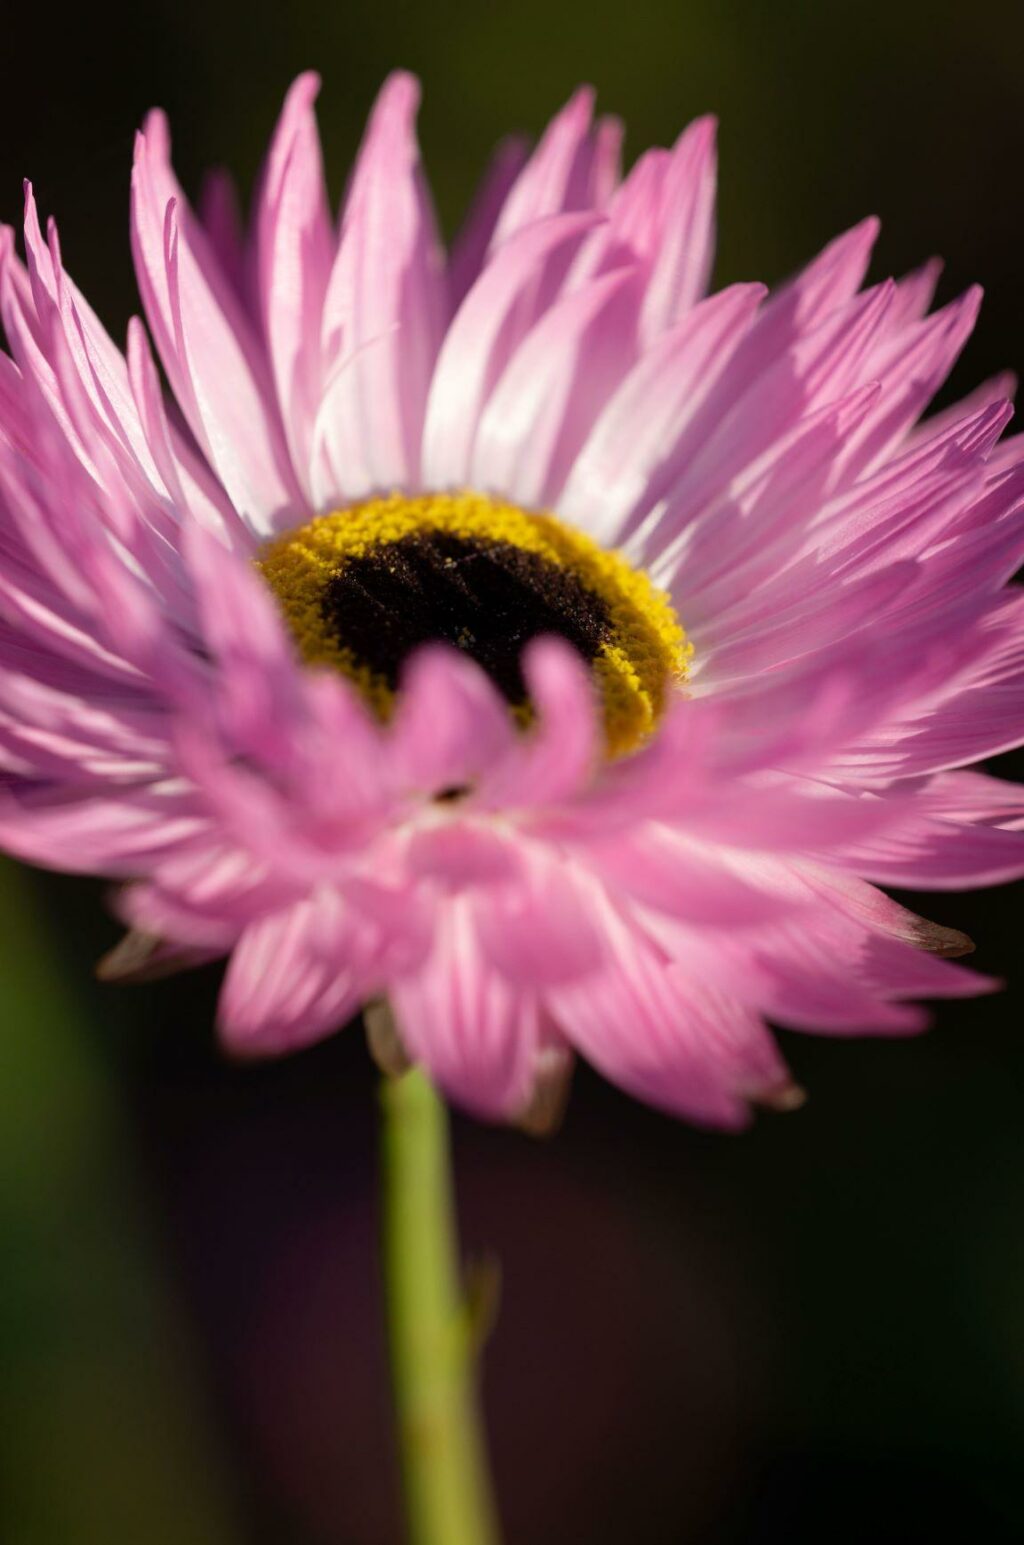 Gordon Castle grows pink daisy like acroclinium as a cut flower to use both fresh and dried.